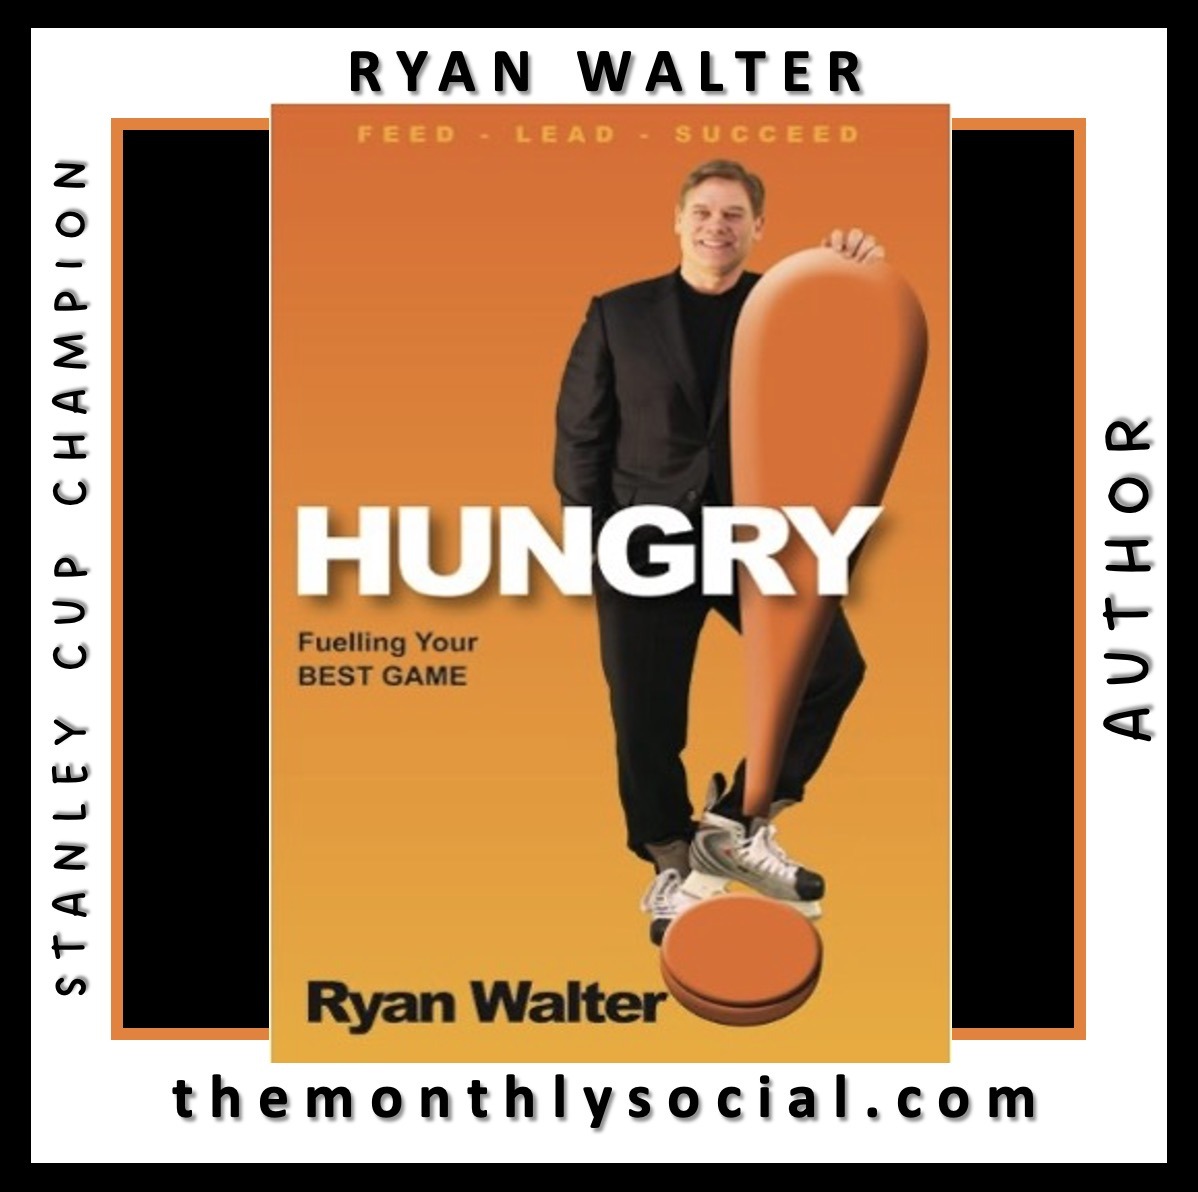 Book: Hungry, Fuelling Your Best Game, By Ryan Walter